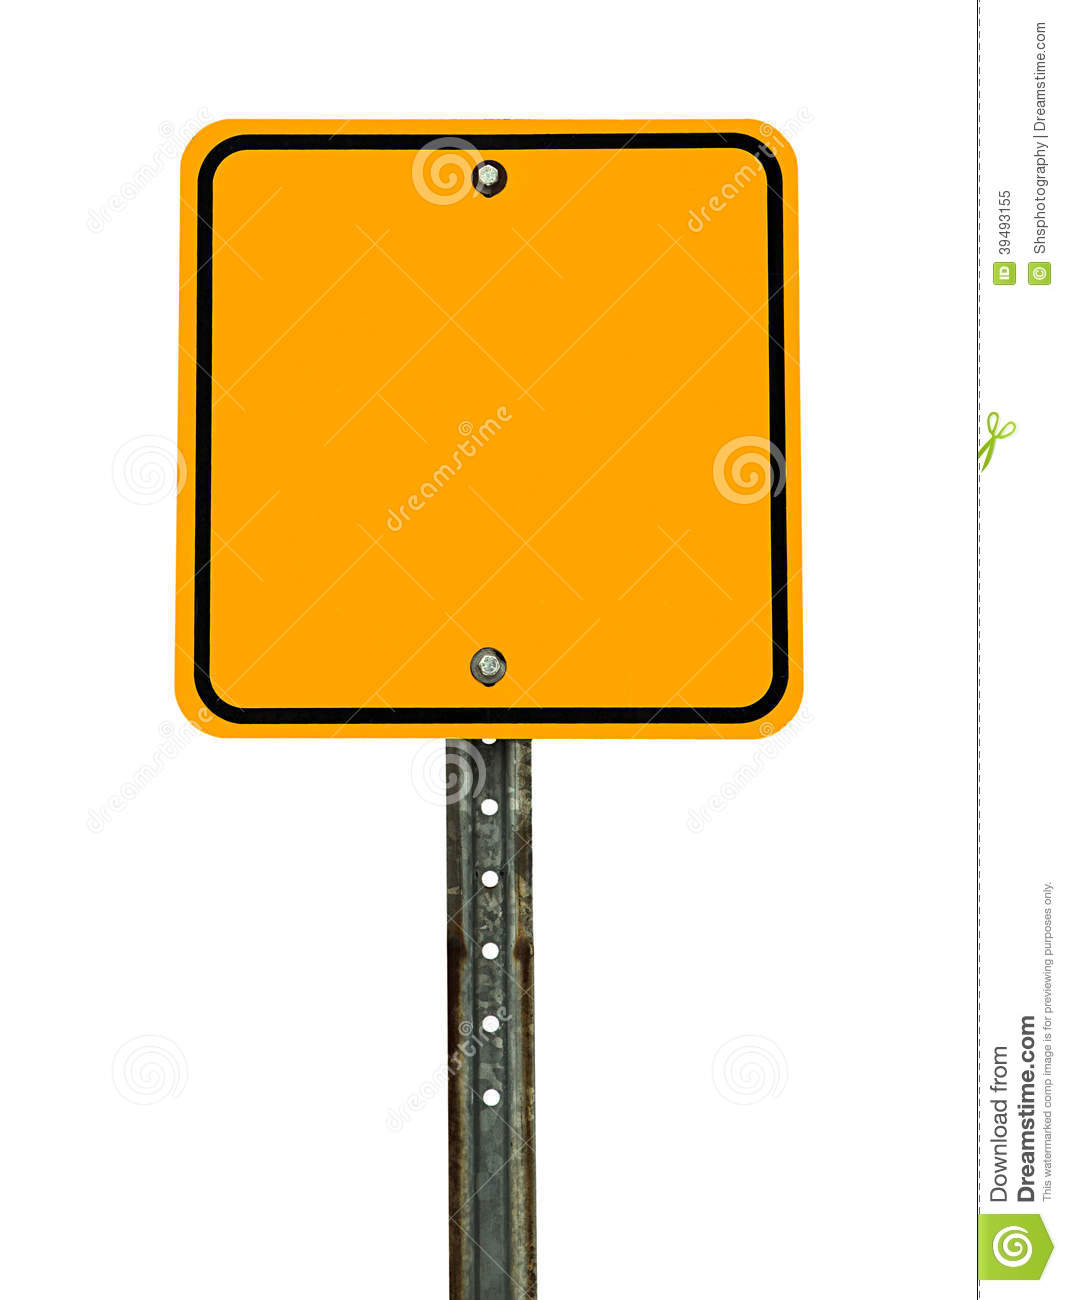 Of A Blank Square Shaped Yellow Caution Traffic Sign With Black    